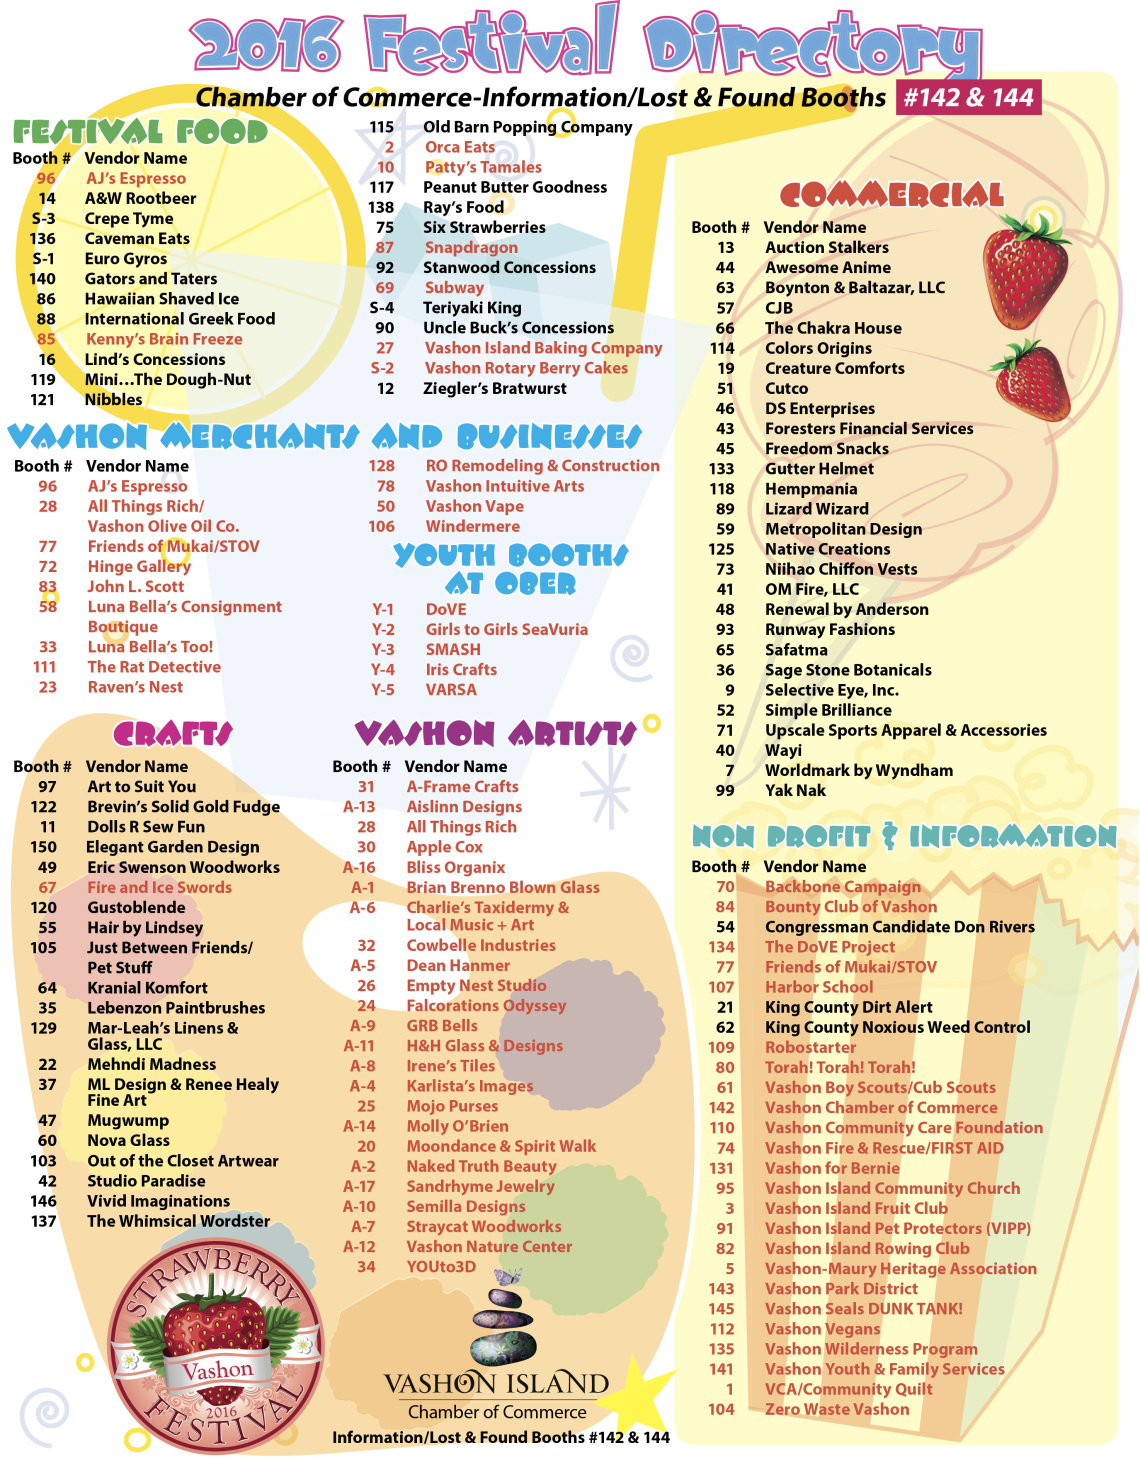 Strawberry Fest 2016 Directory.indd